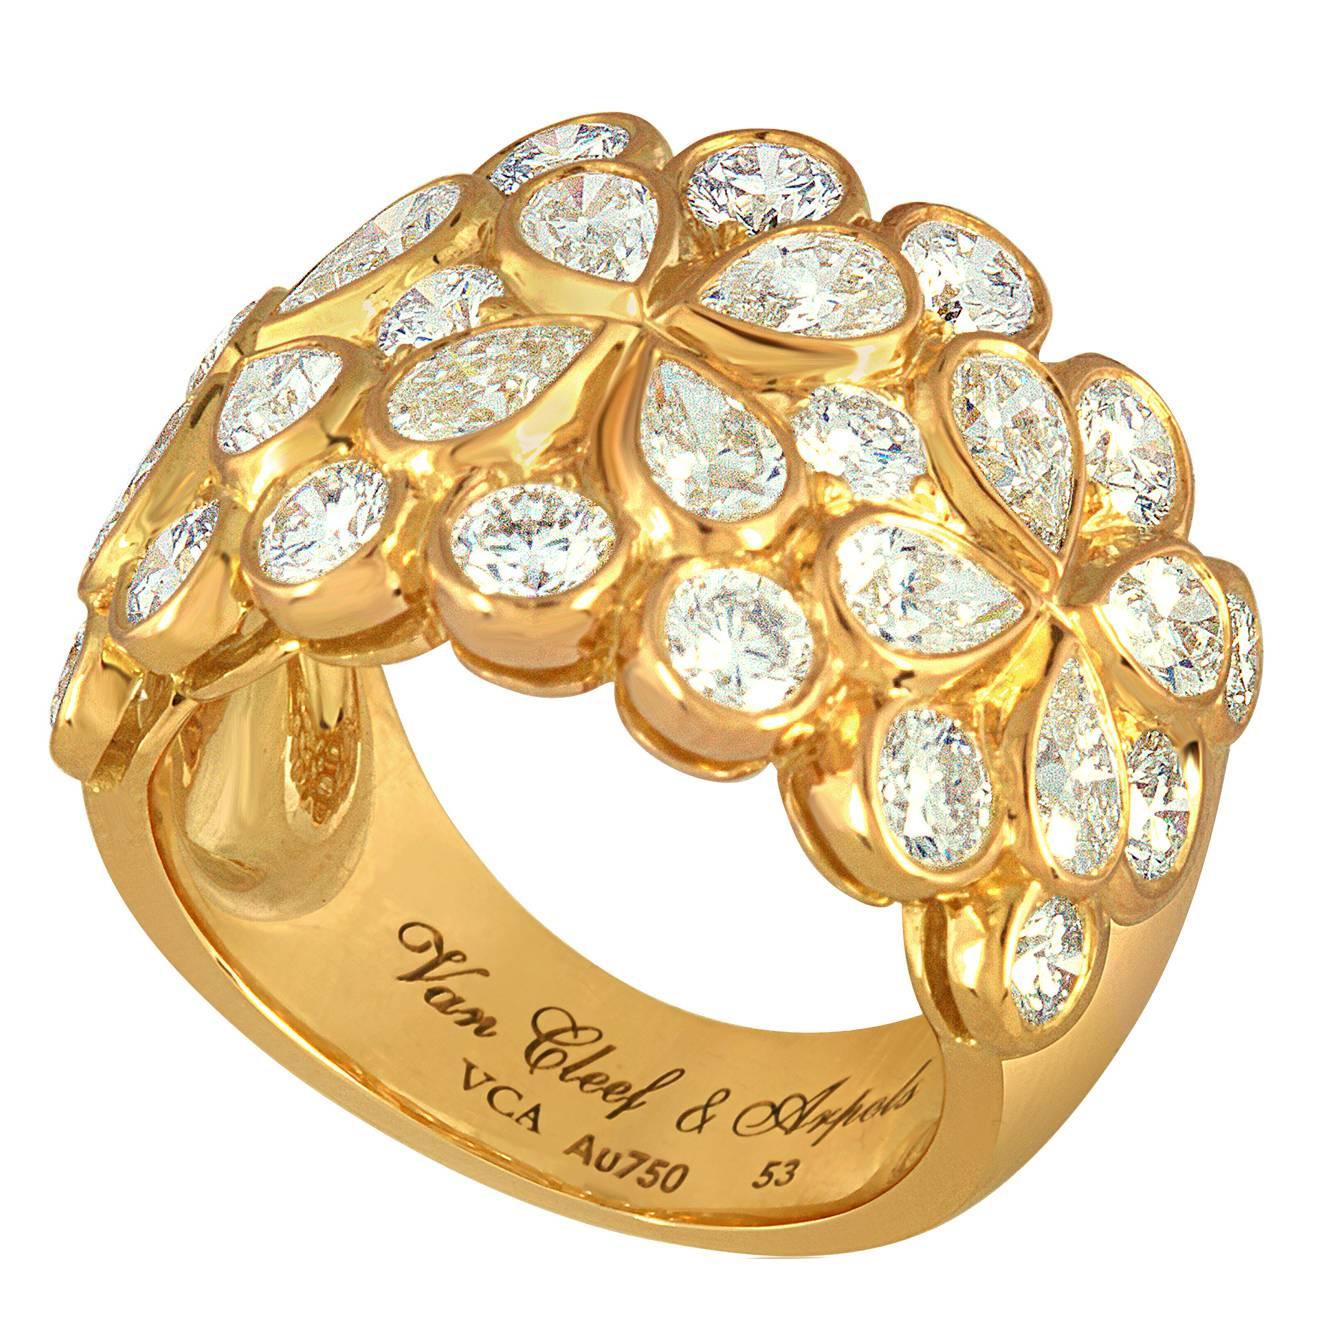 Van Cleef & Arpels "Rosee" 4.25 Carats Diamond Gold Floral Band Ring